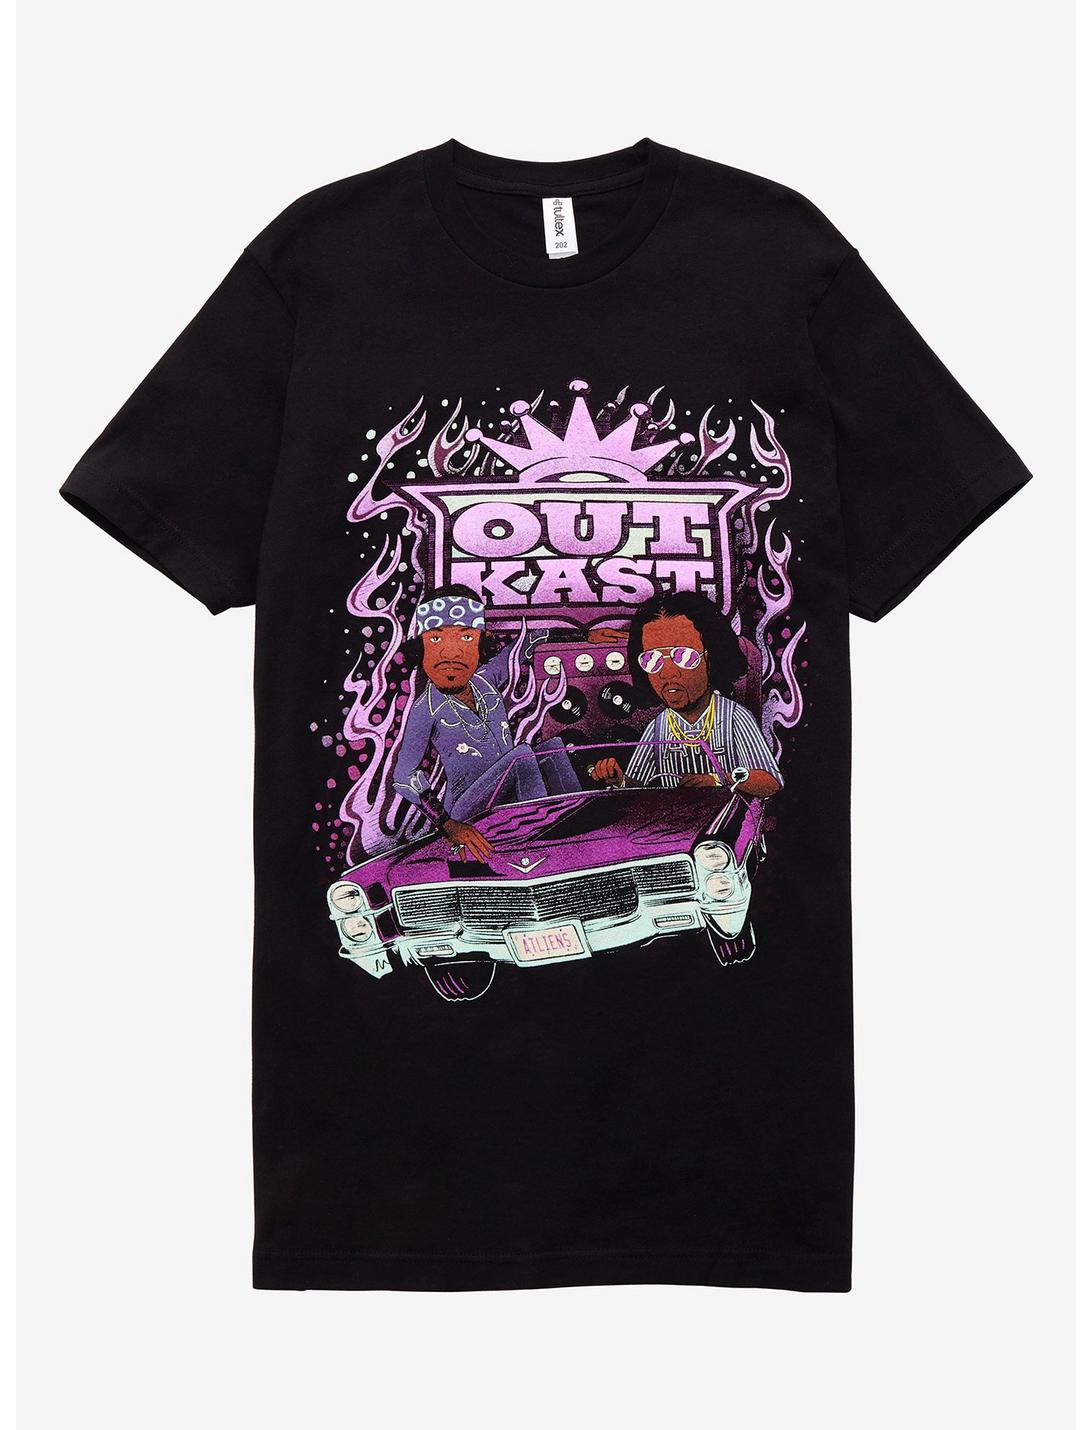 Outkast Two Dope Boyz (In a Cadillac) T-Shirt, BLACK, hi-res